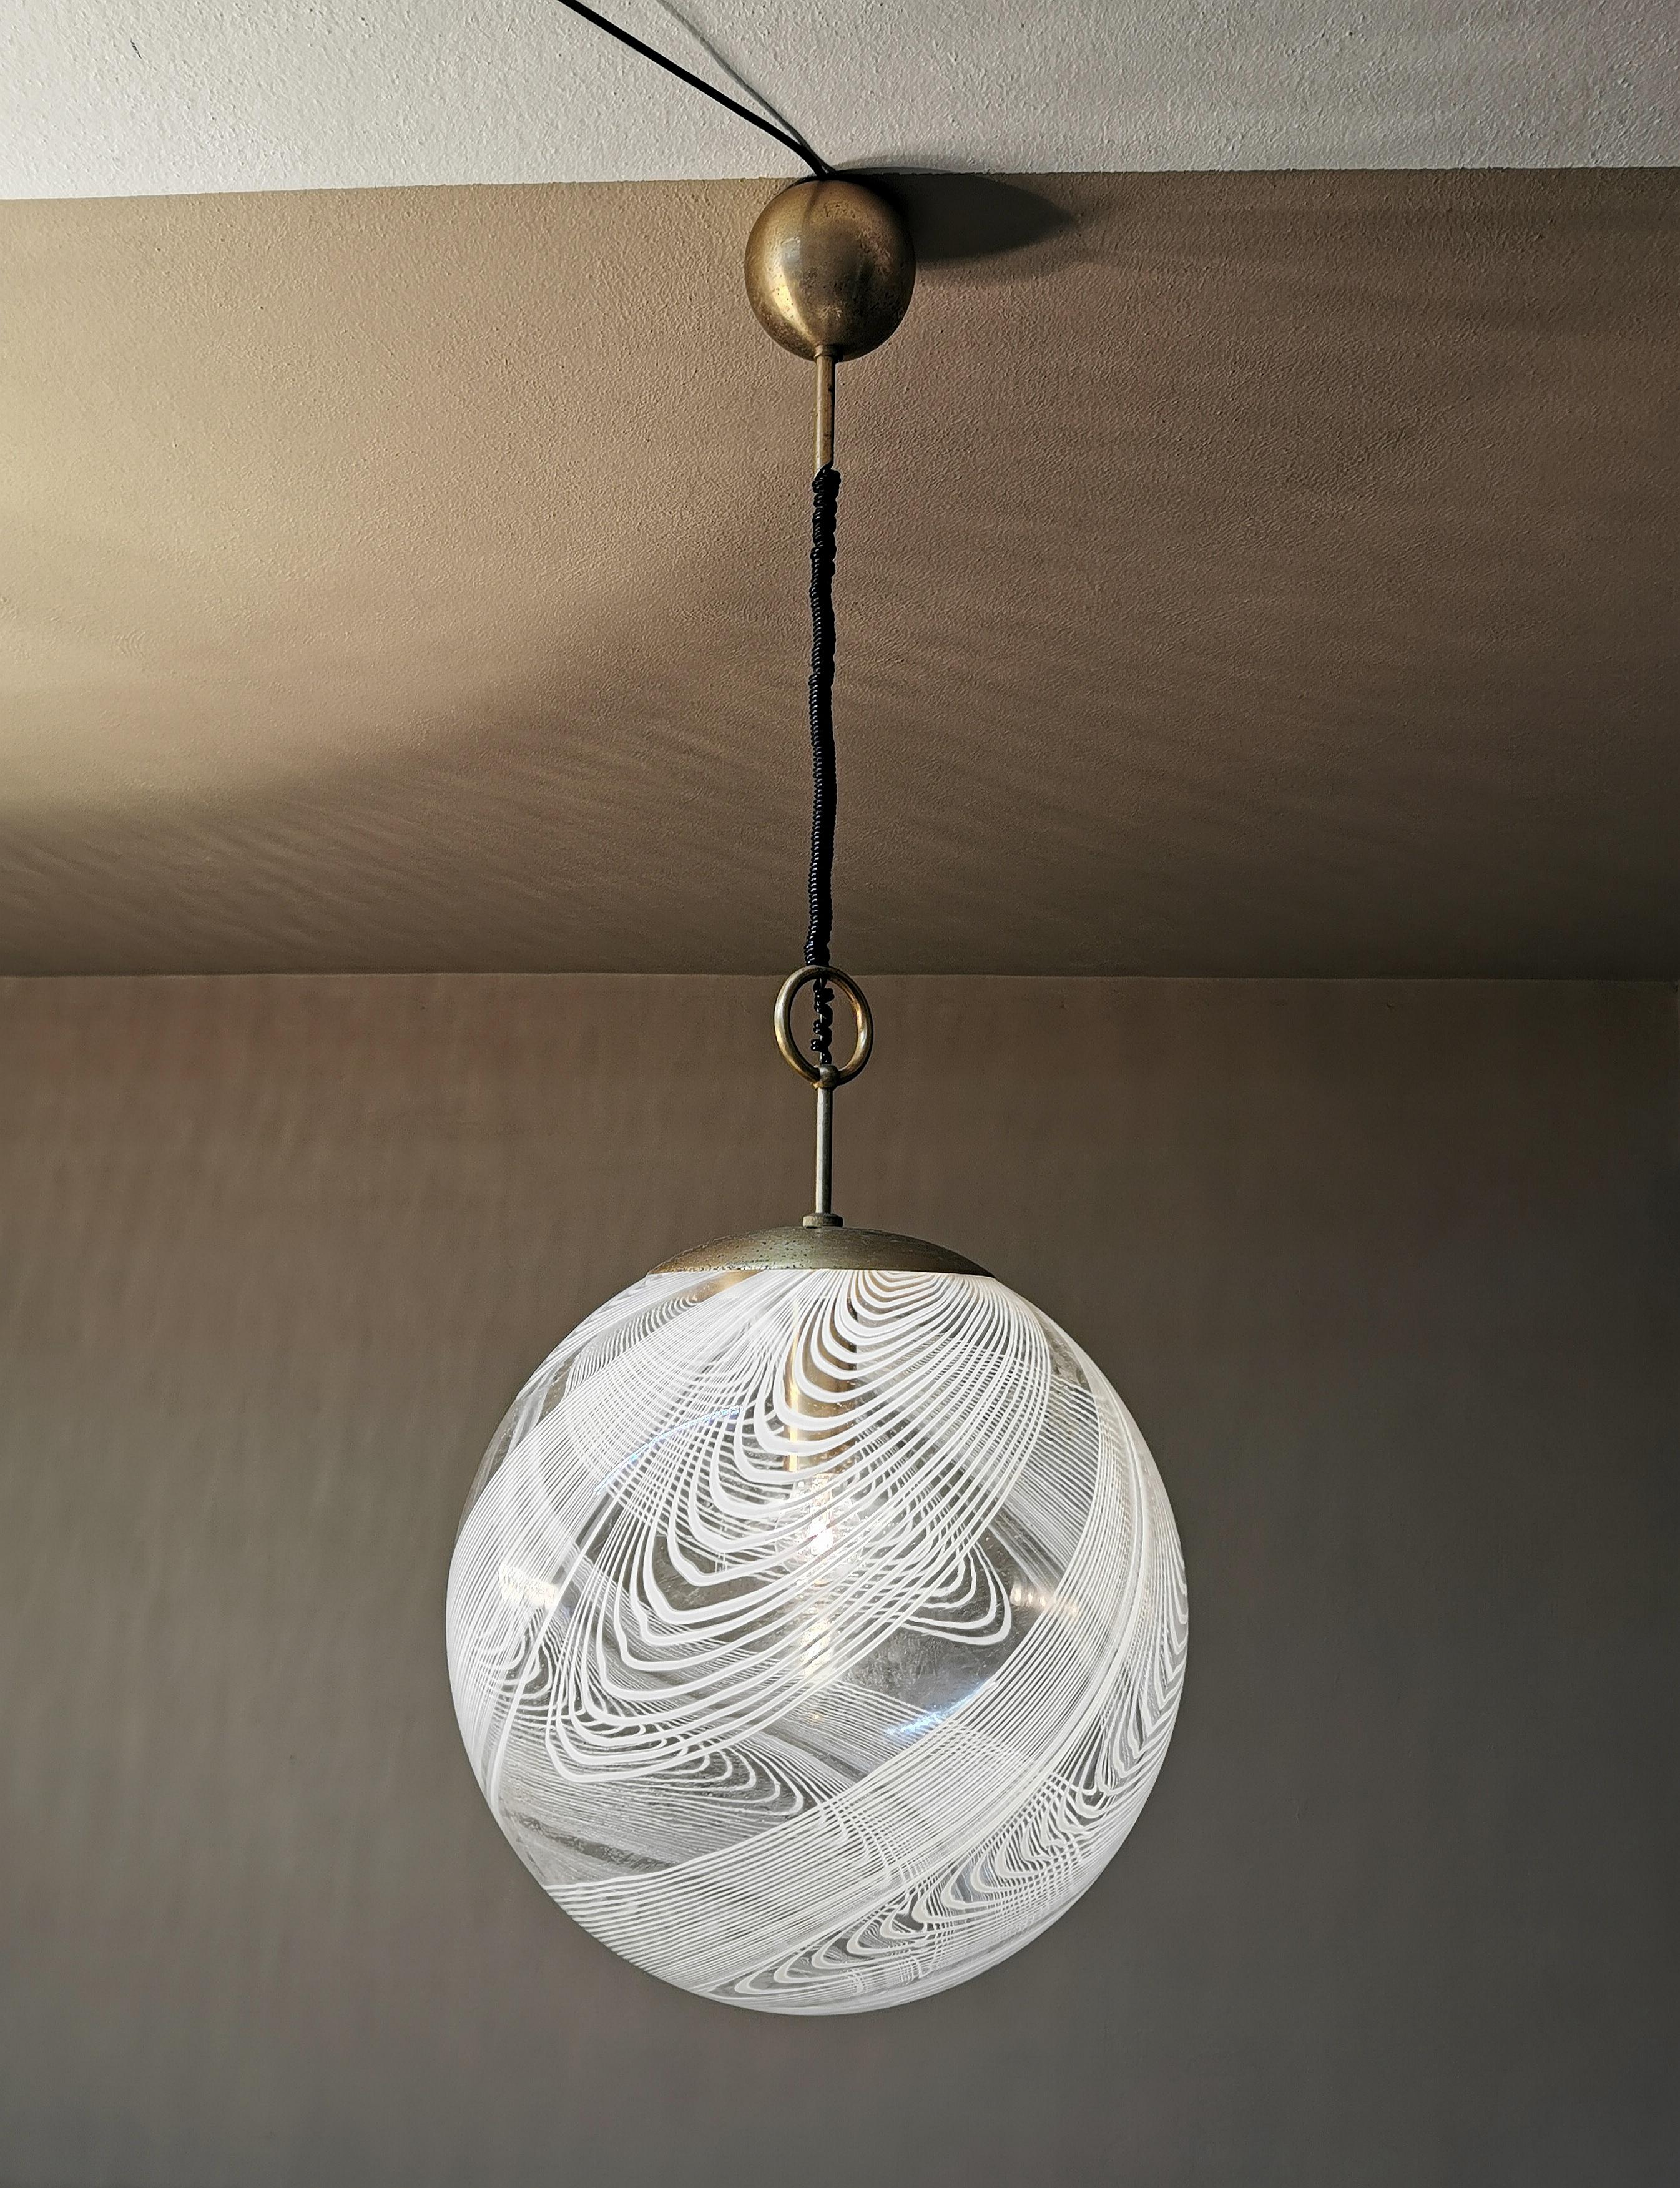 Pendant lamp with one light in white Murano glass by Venini with a spherical shape with particular processing of intertwining designs. Structure in golden metal. Italy, 1970.